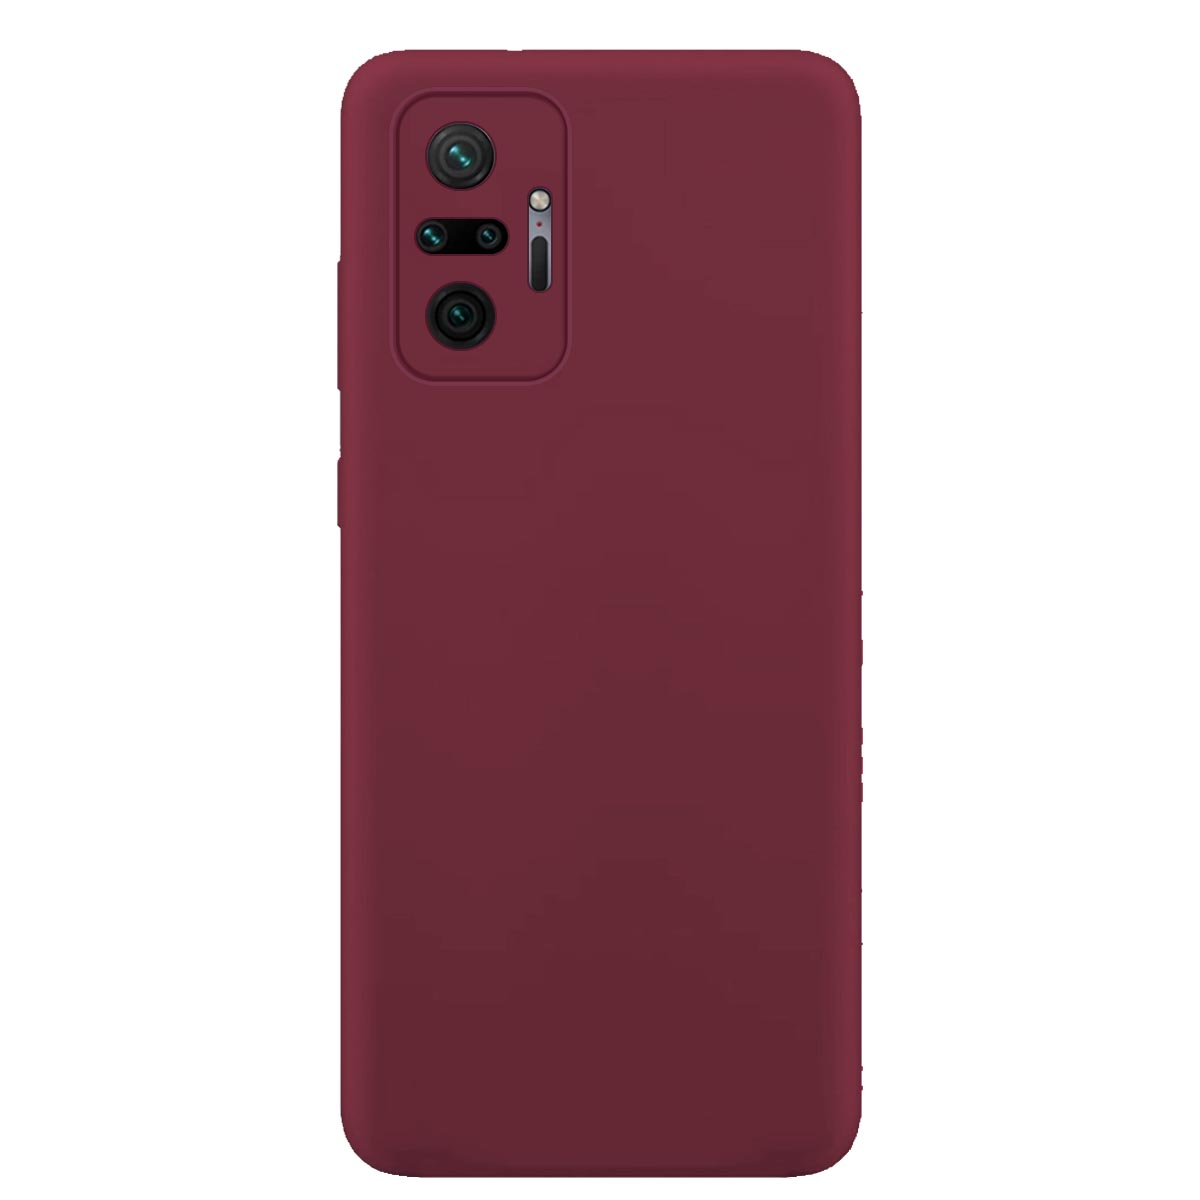 Note Max, Redmi 10 Note MTB 10 Pro MORE Case, Xiaomi, Backcover, ENERGY Silikon Soft Pro, Redmi Weinrot